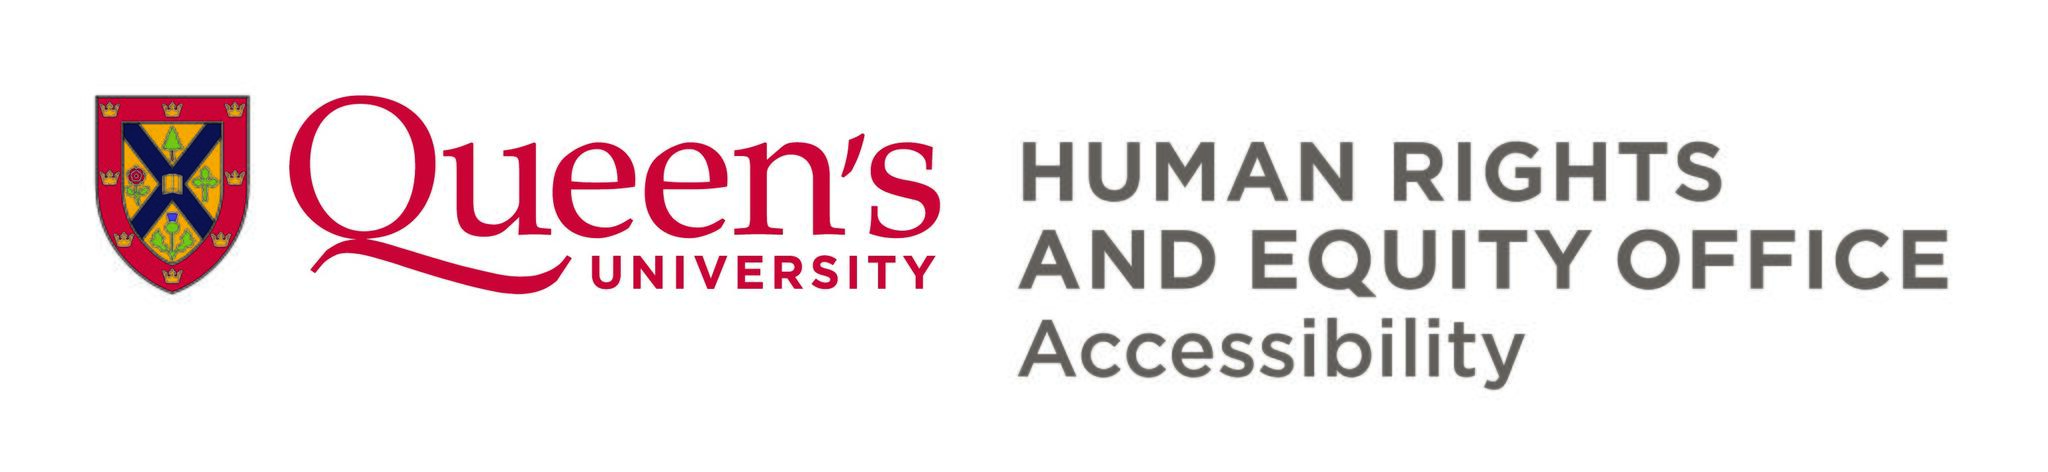 Queen's University. Human Rights and Equity Office - Accessibility